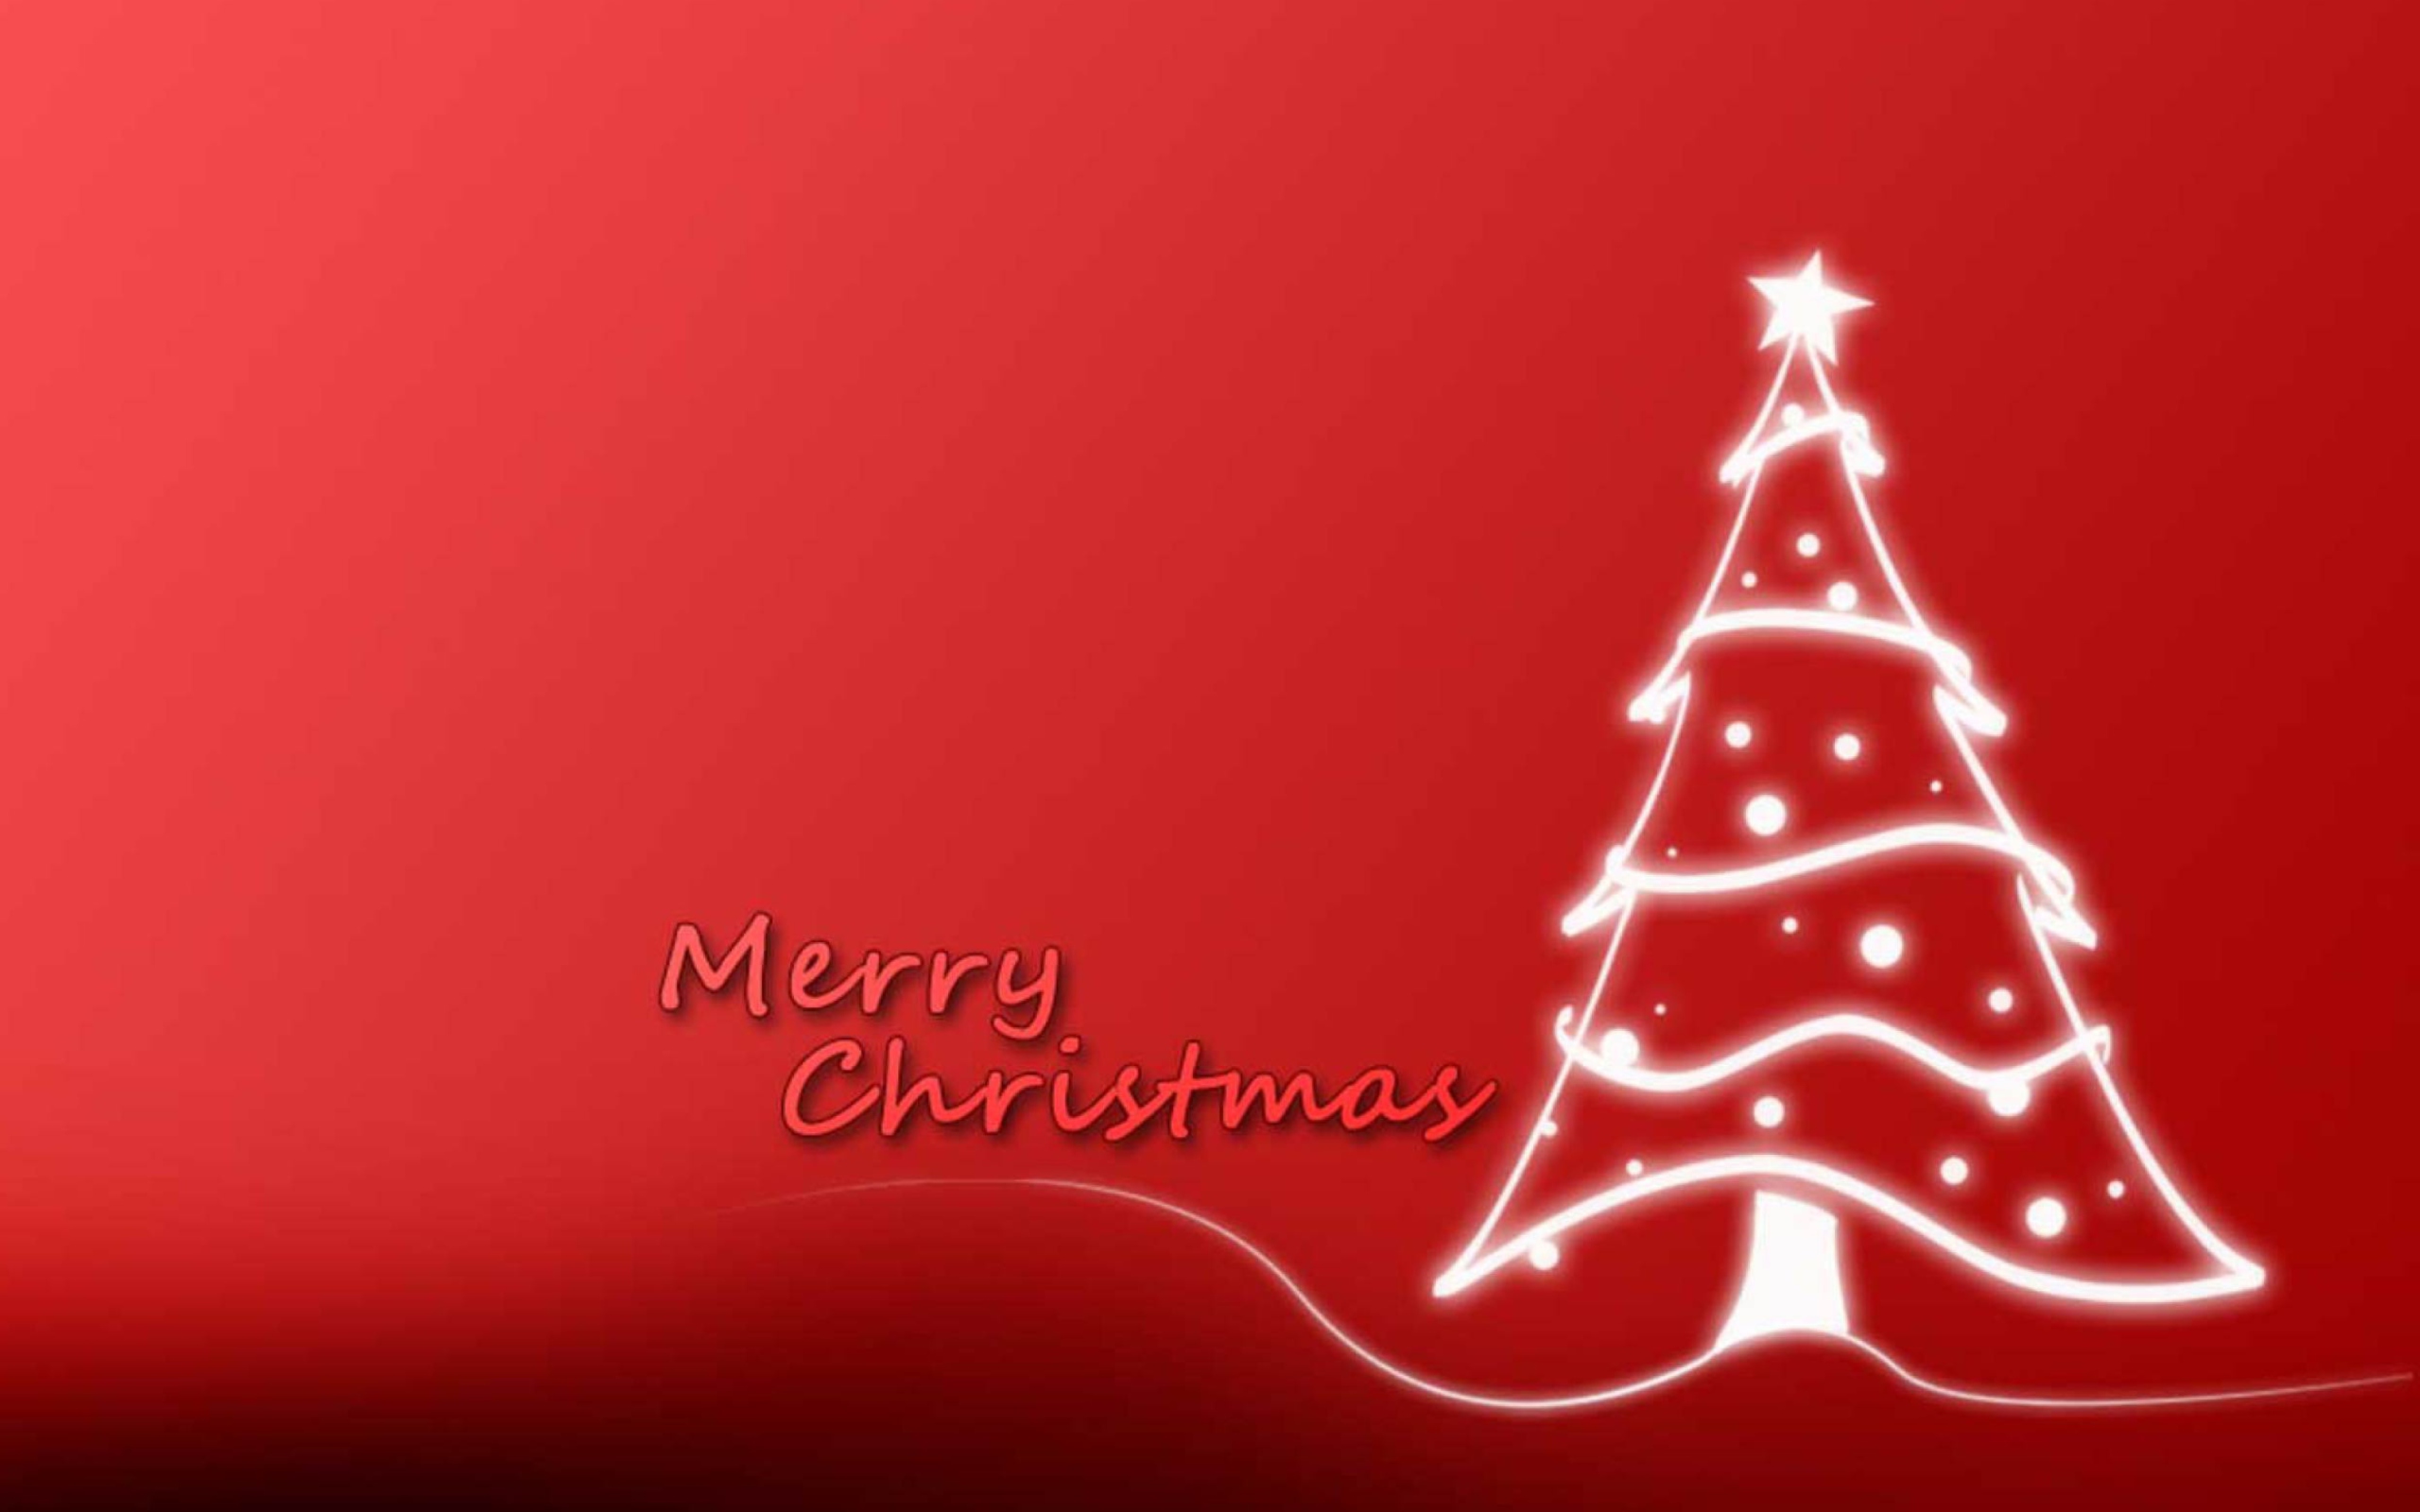 Das Christmas Red And White Tree Wallpaper 2560x1600